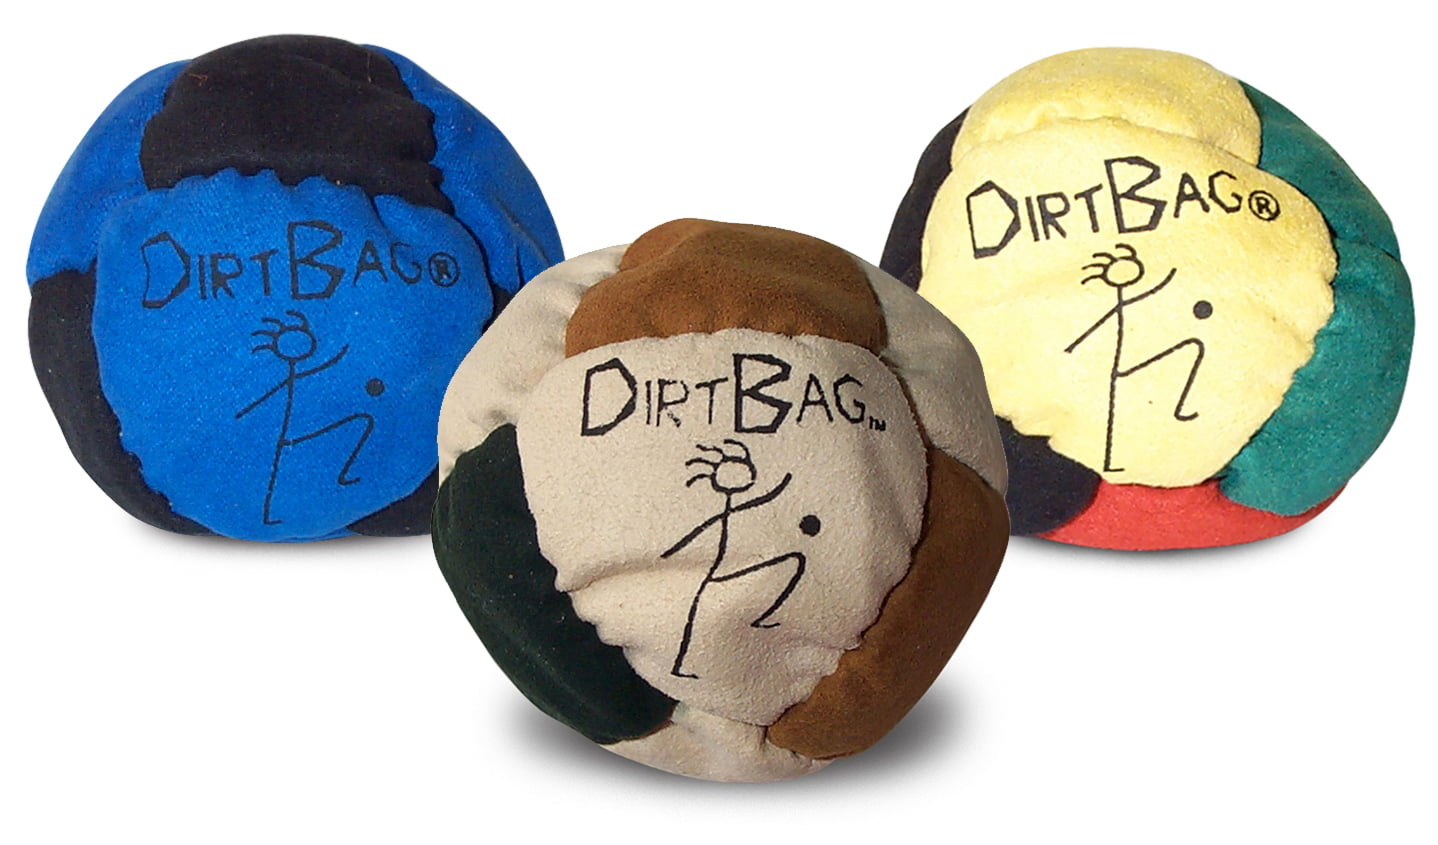 Red Heavy Suede Hackey Sack Footbag 3.5oz/100g Great for Kicking or Tossing! 